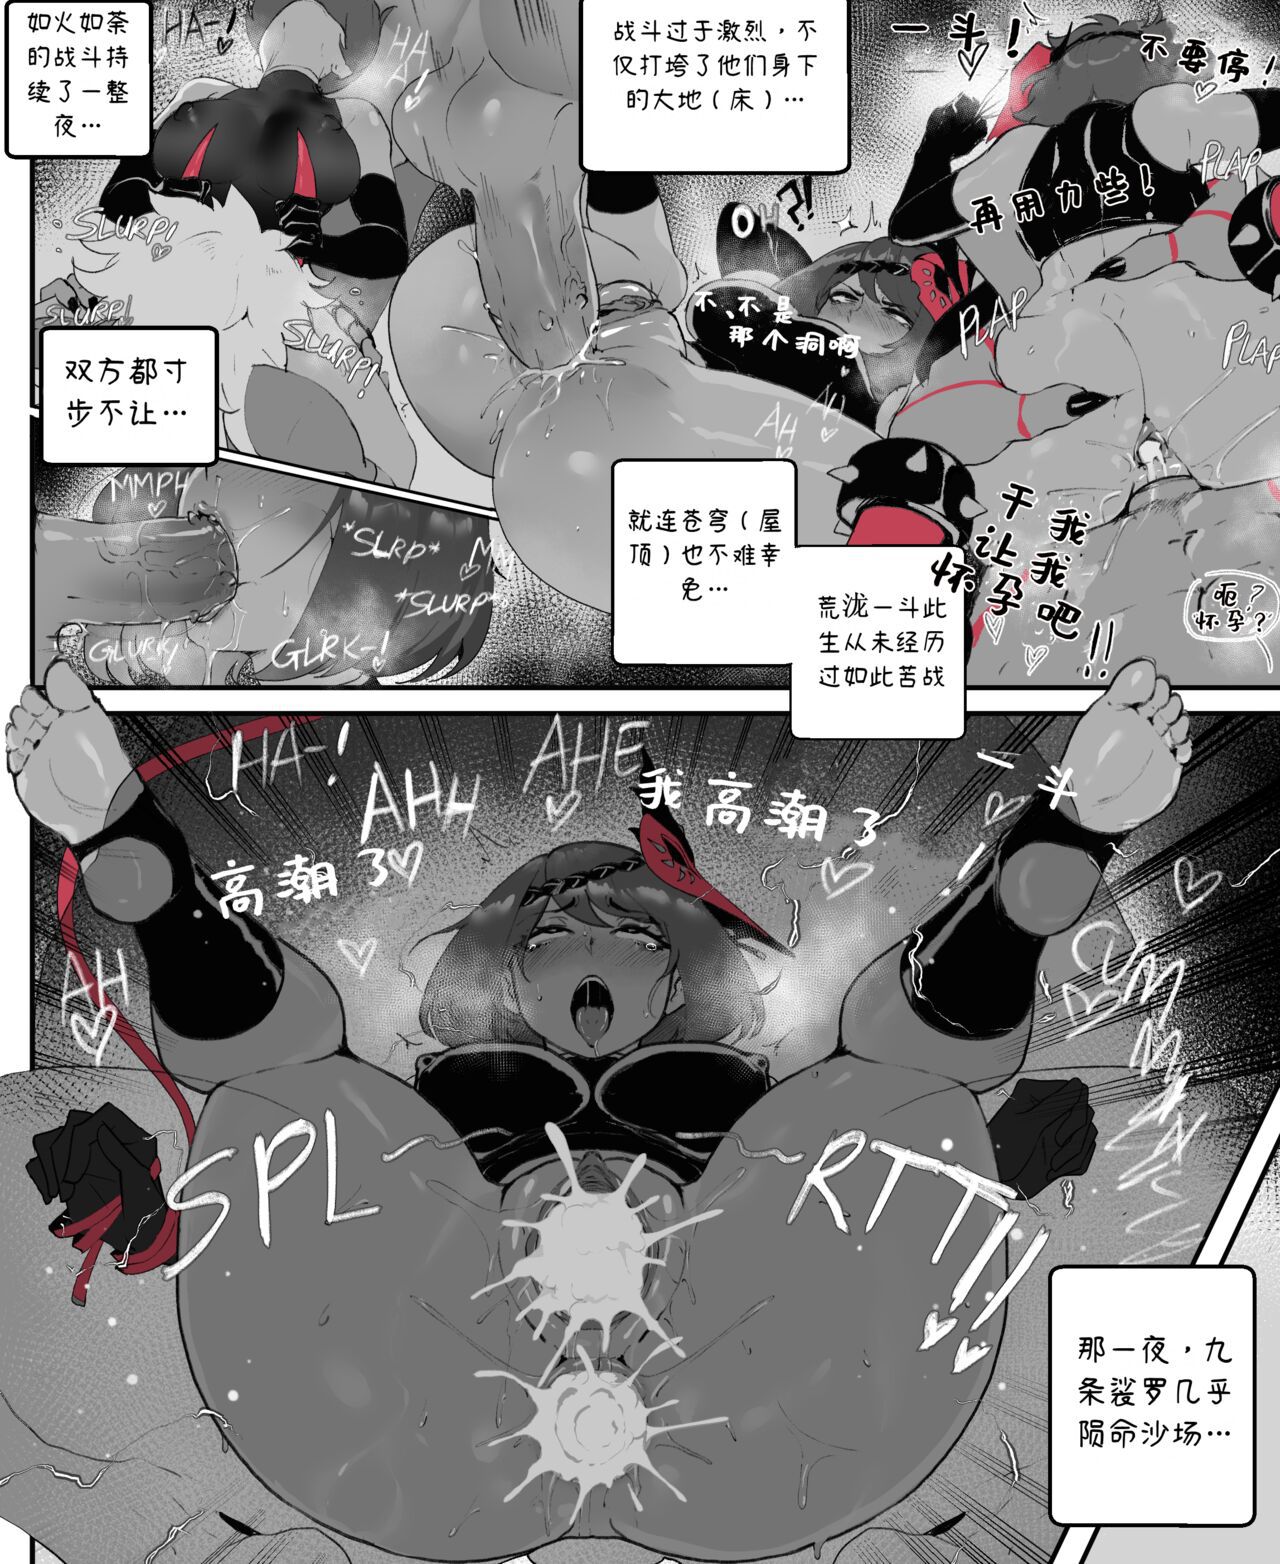 ThiccWithaQ [Chinese] [Ongoing] ThiccWithaQ 【Neko汉化】 82